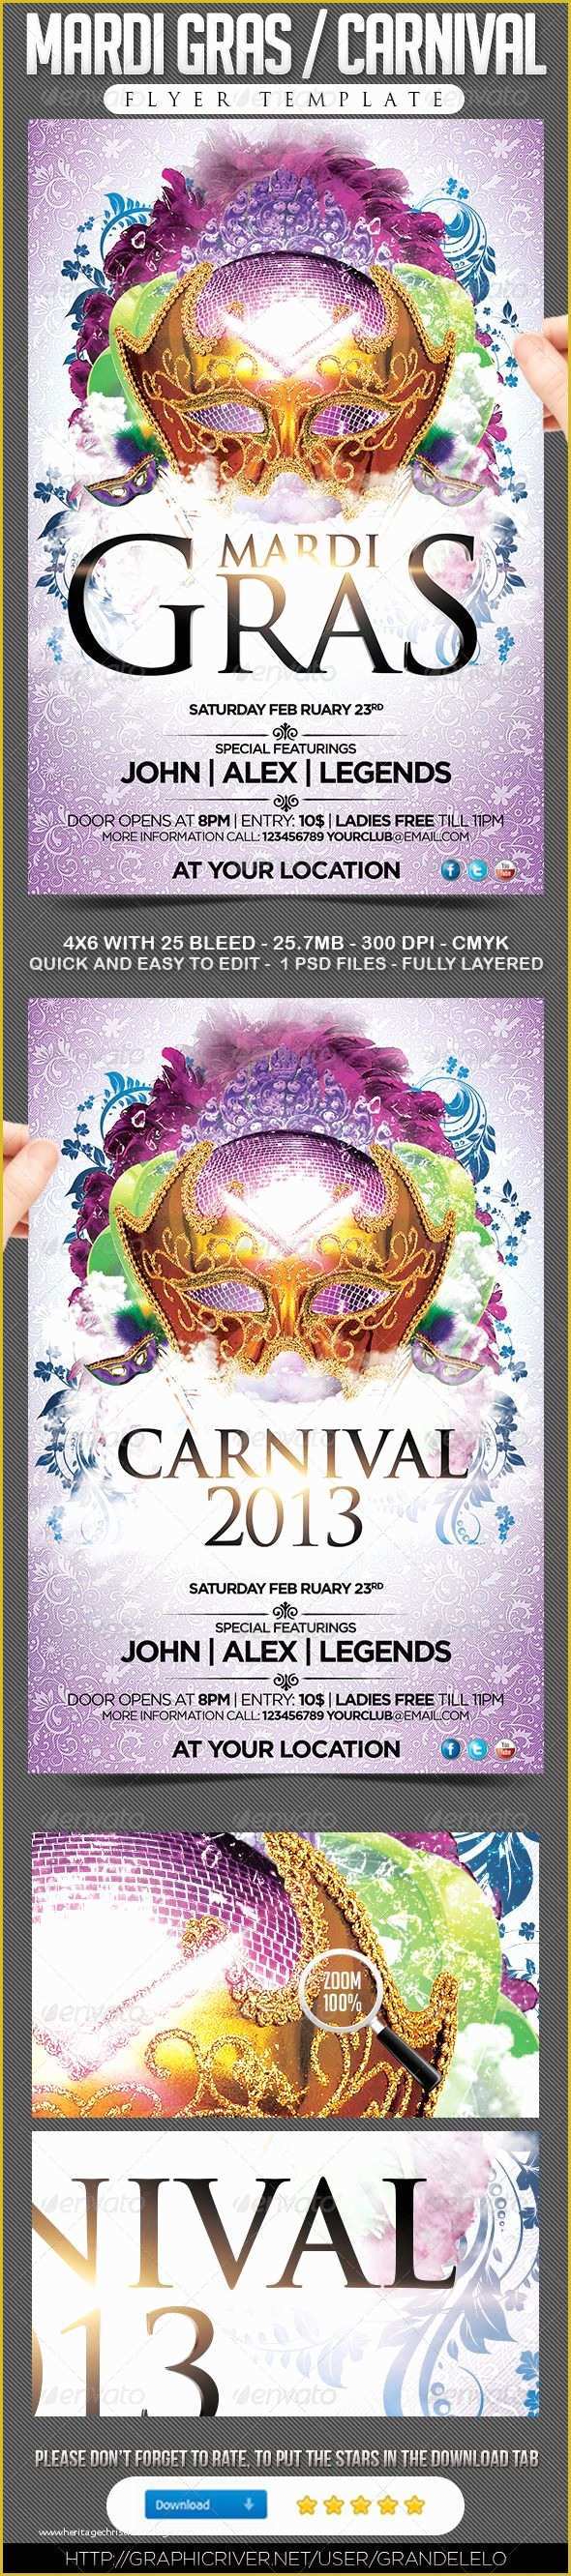 Mardi Gras Flyer Template Free Download Of 1000 Images About Party Flyer Template Downloads On